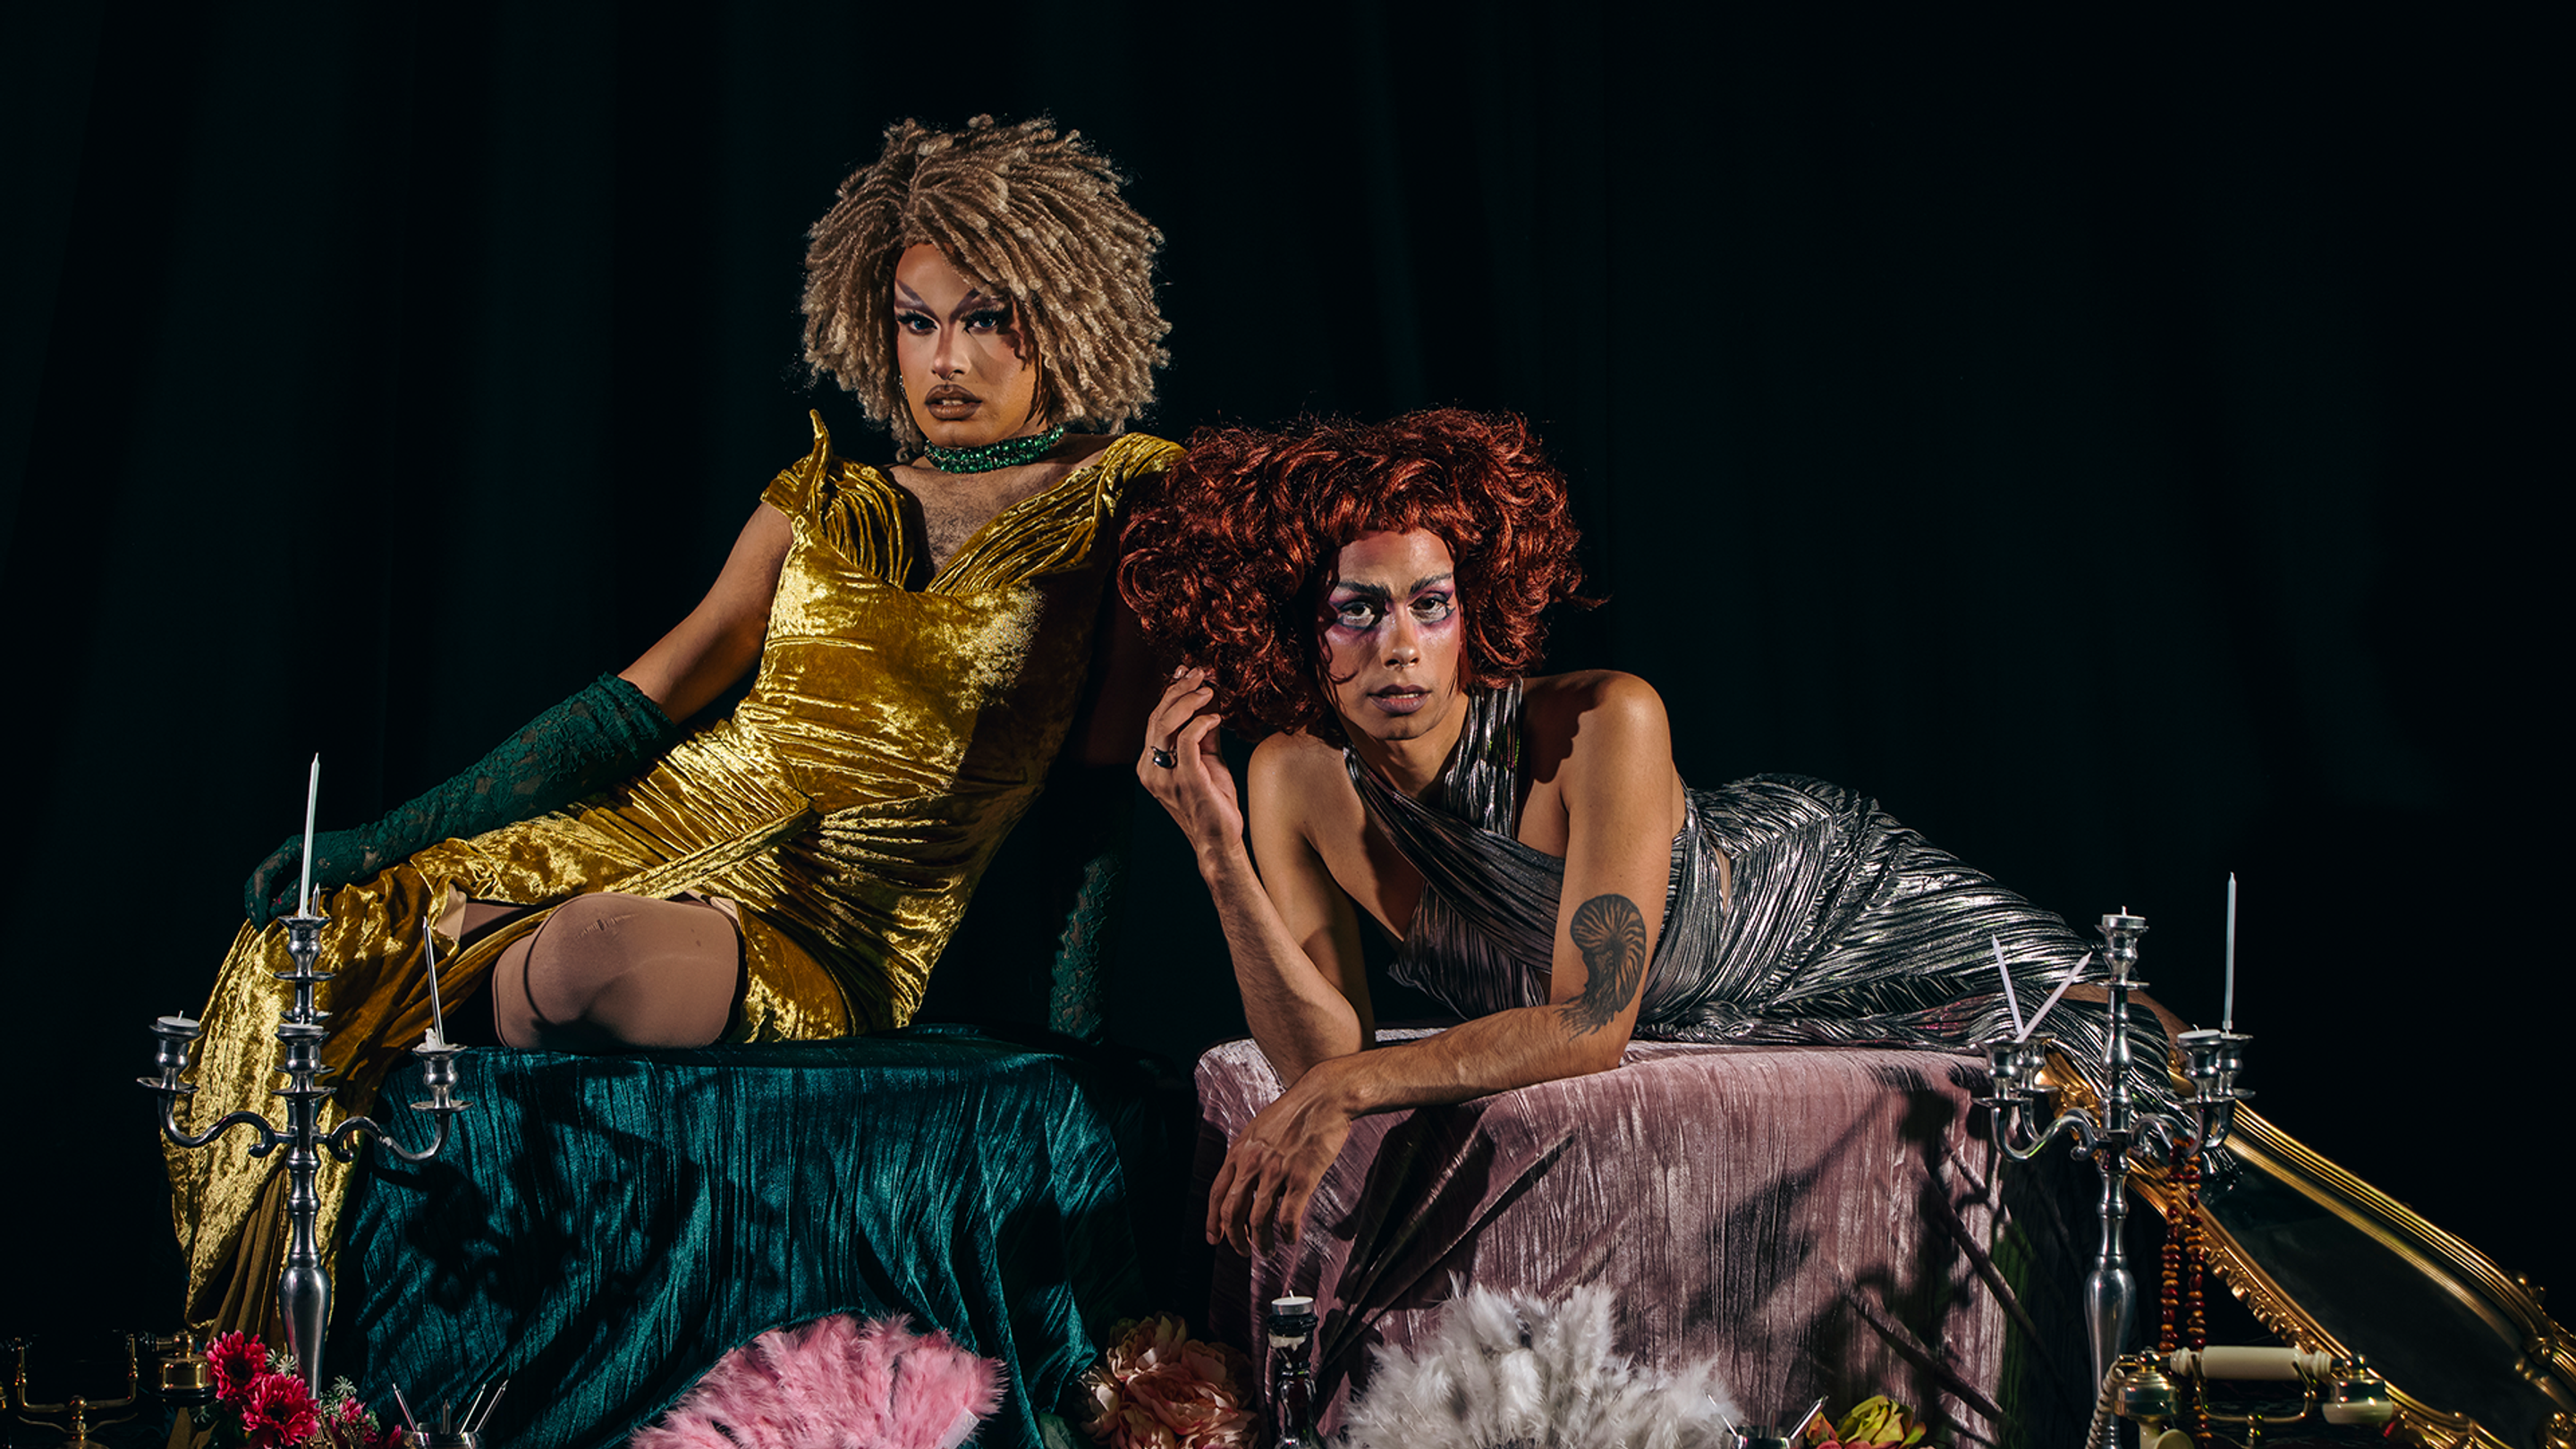 Drag queens Cerulean and Stone Motherless Cold recline back towards each other while wearing shiny, party dresses